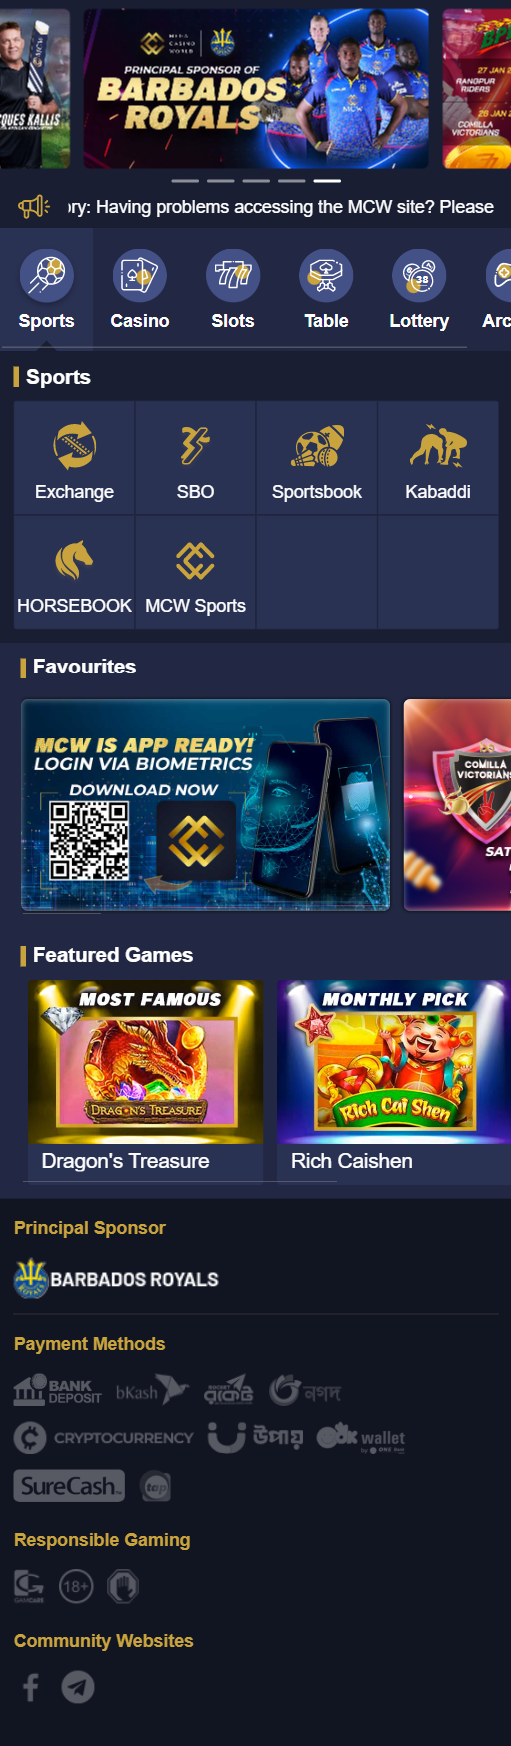 MCW Casino is a leading online gaming website, offering sports betting, online casino, and online games